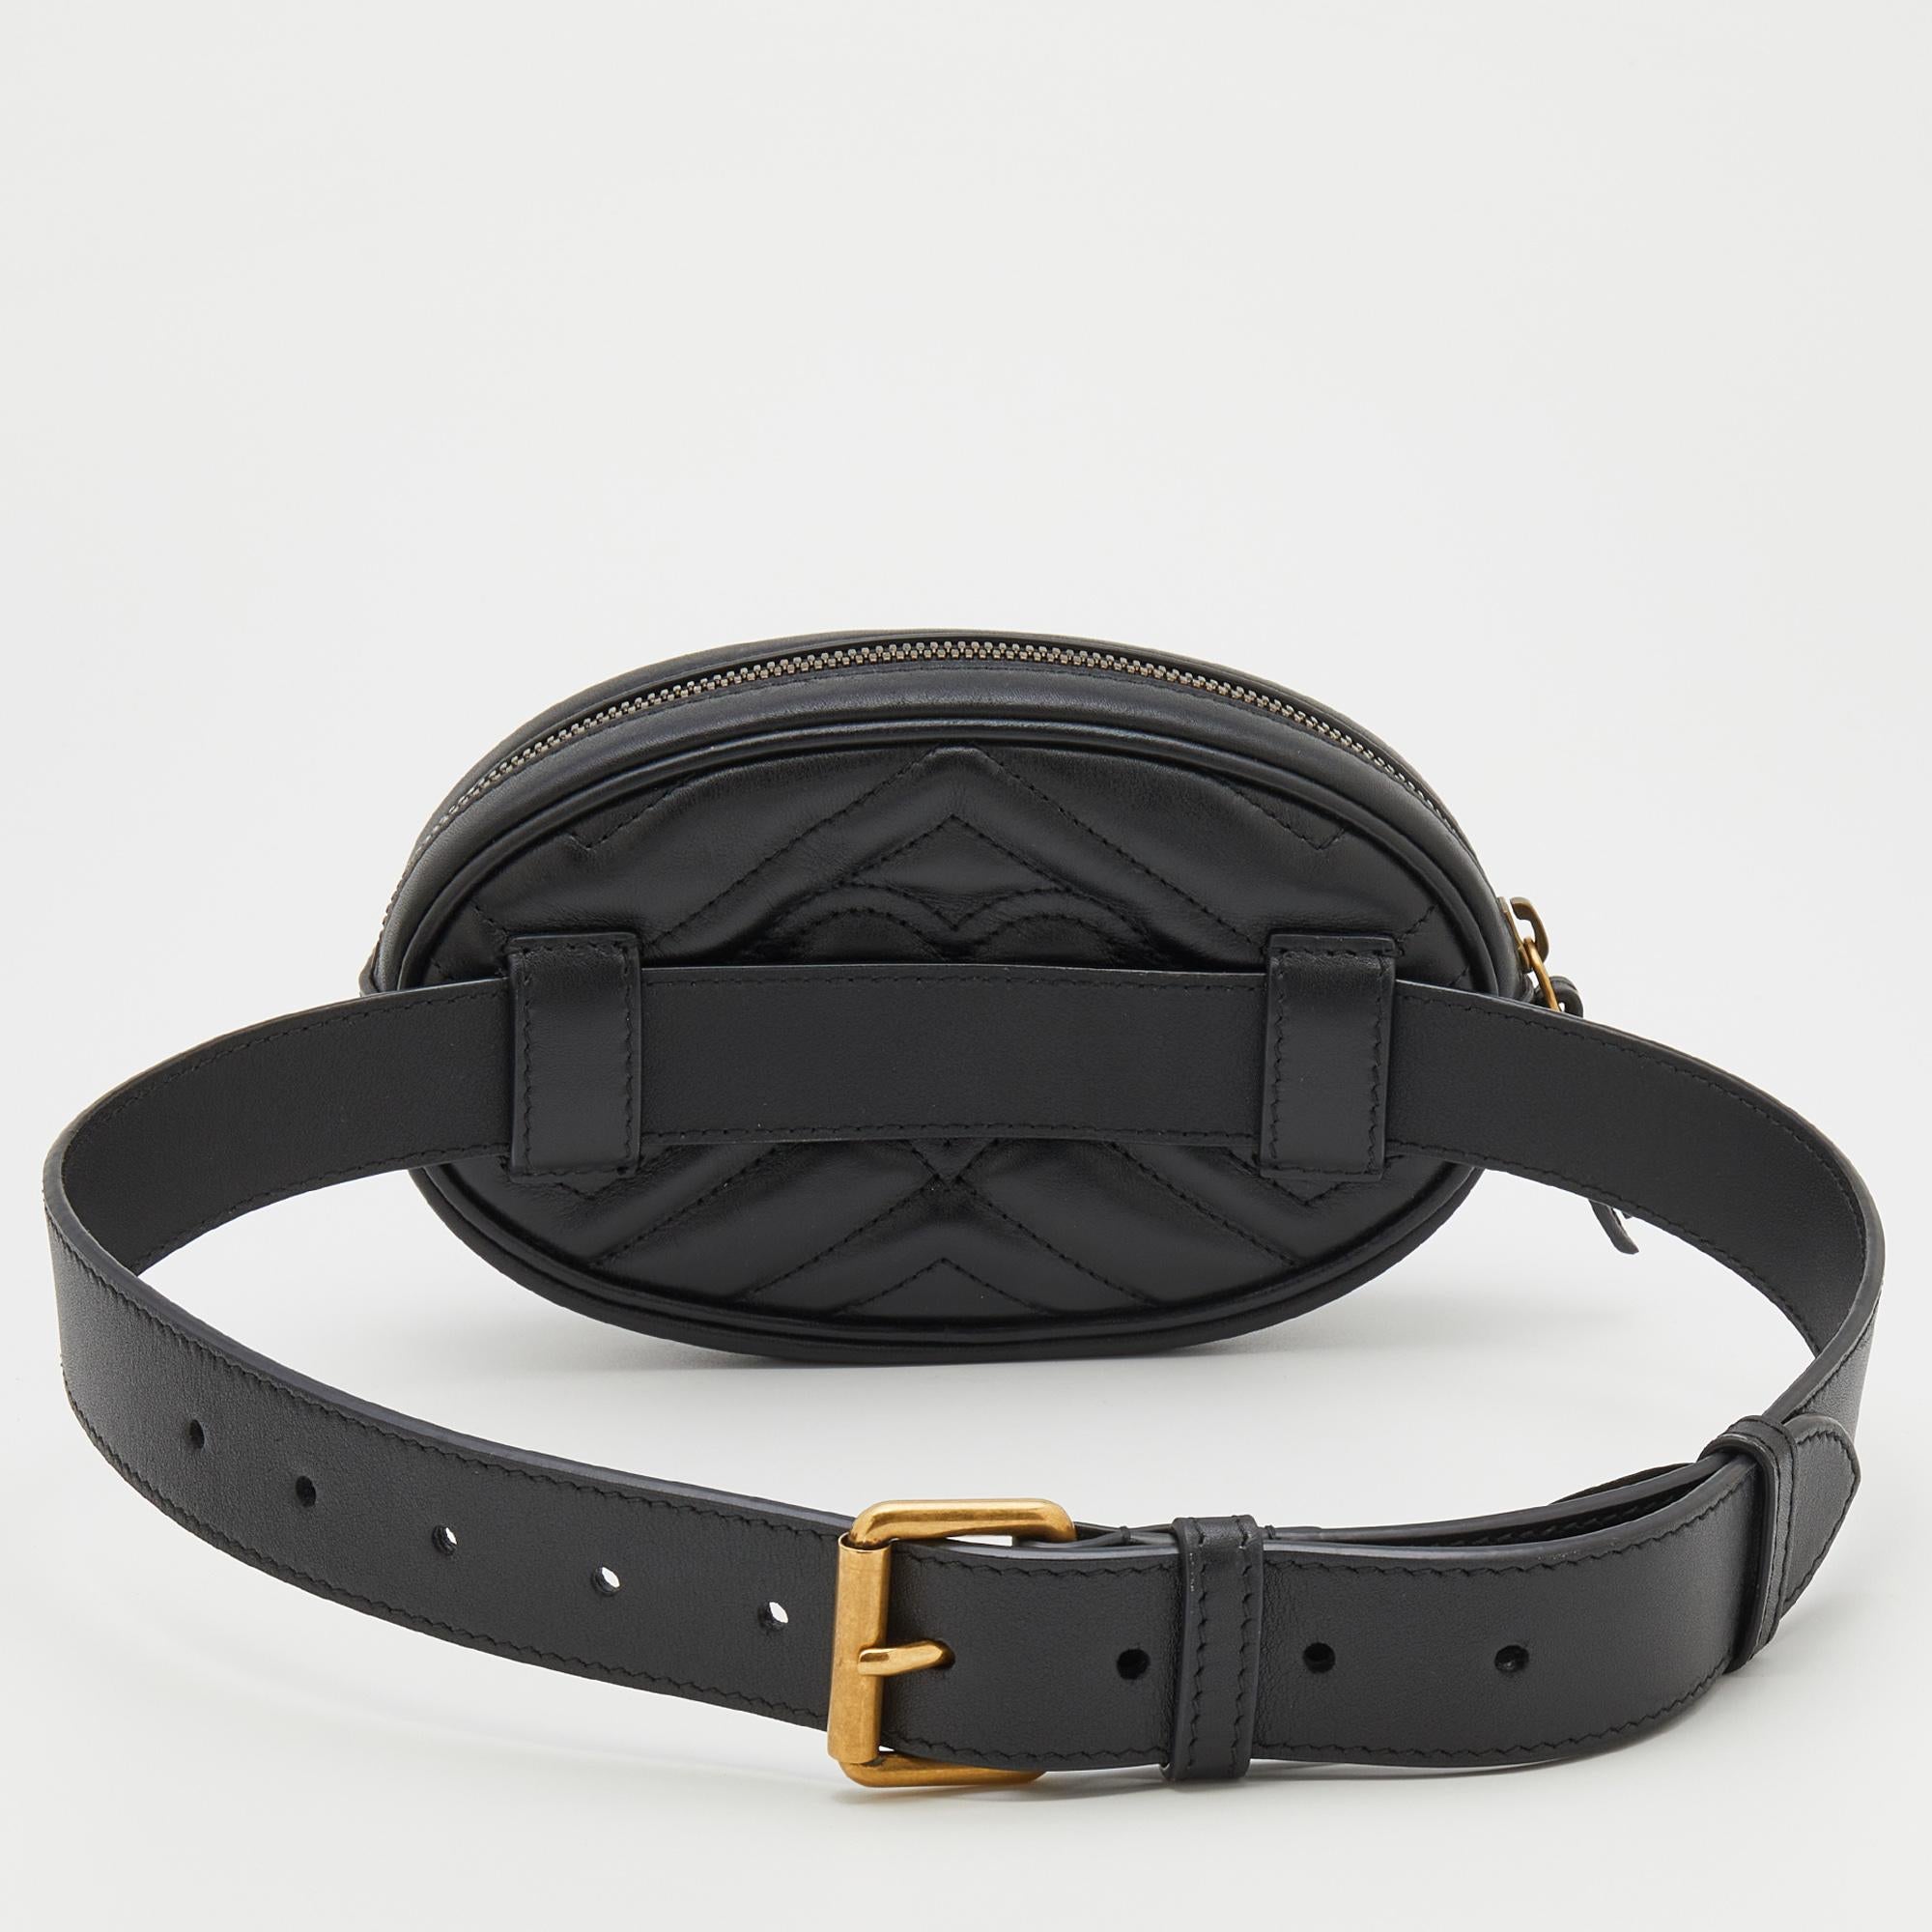 The GG Marmont collection from the House of Gucci, since its creation, has risen to never-ending fame and popularity. This belt bag from Gucci is carved to perfection and exhibits a unique style. It is made using matelassé leather on the exterior